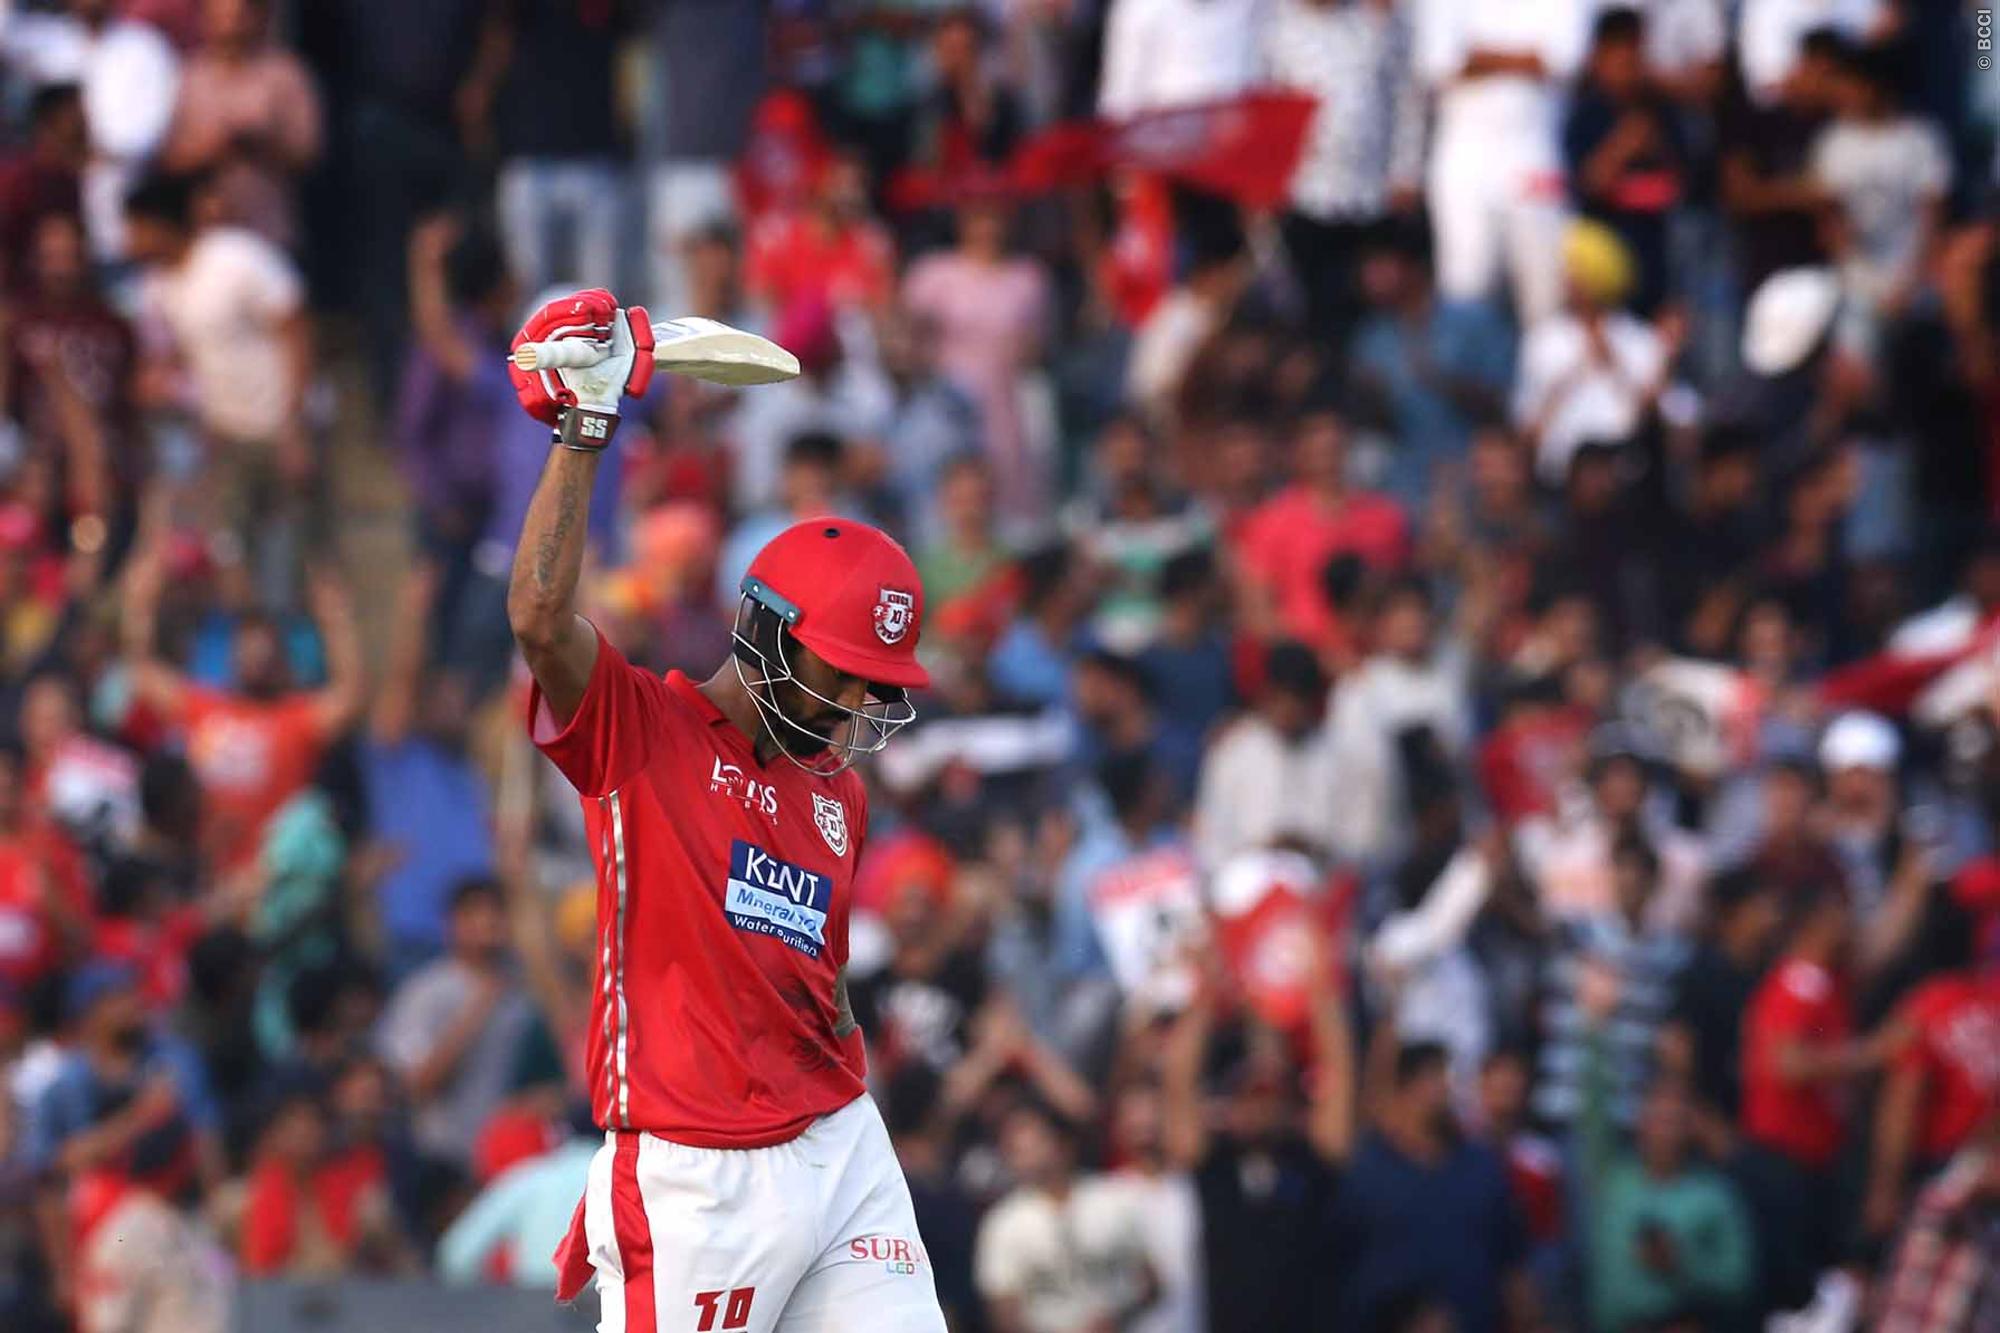 IPL 2019 | Home form will be crucial for Kings XI Punjab, believes Craig McMillan